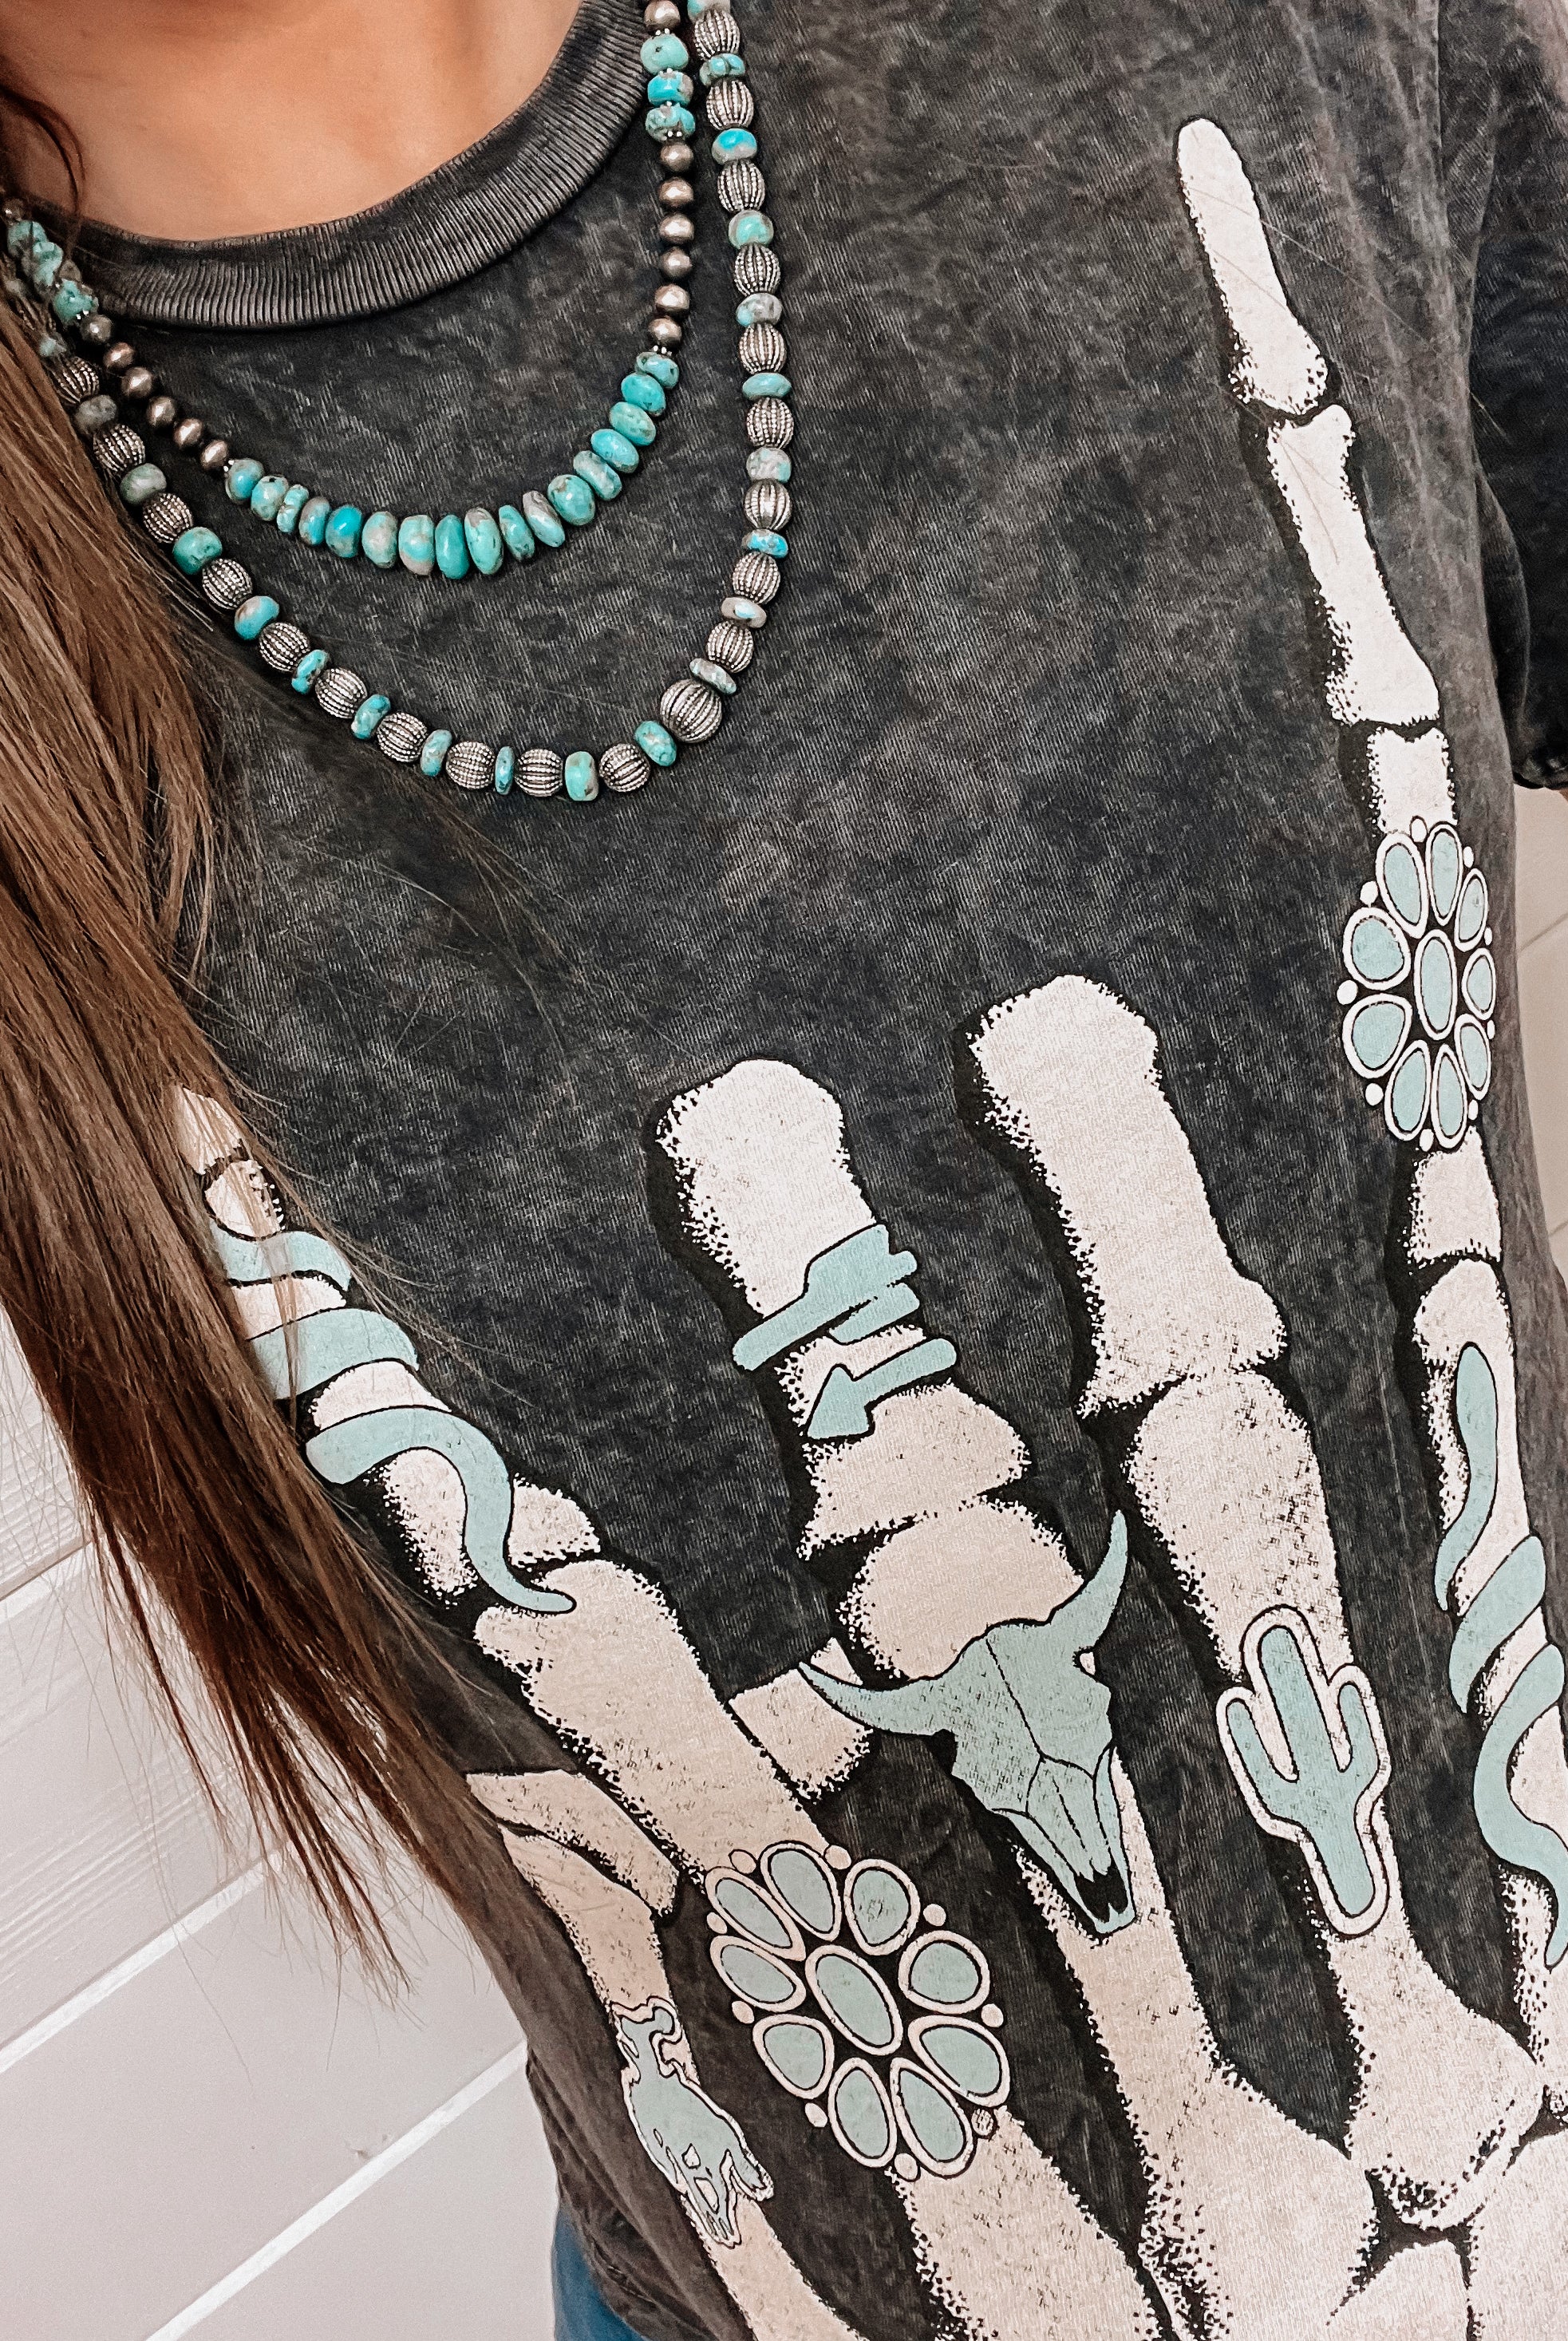 Skeleton Rock Hand Sign Graphic Top-Graphic Tees-Krush Kandy, Women's Online Fashion Boutique Located in Phoenix, Arizona (Scottsdale Area)